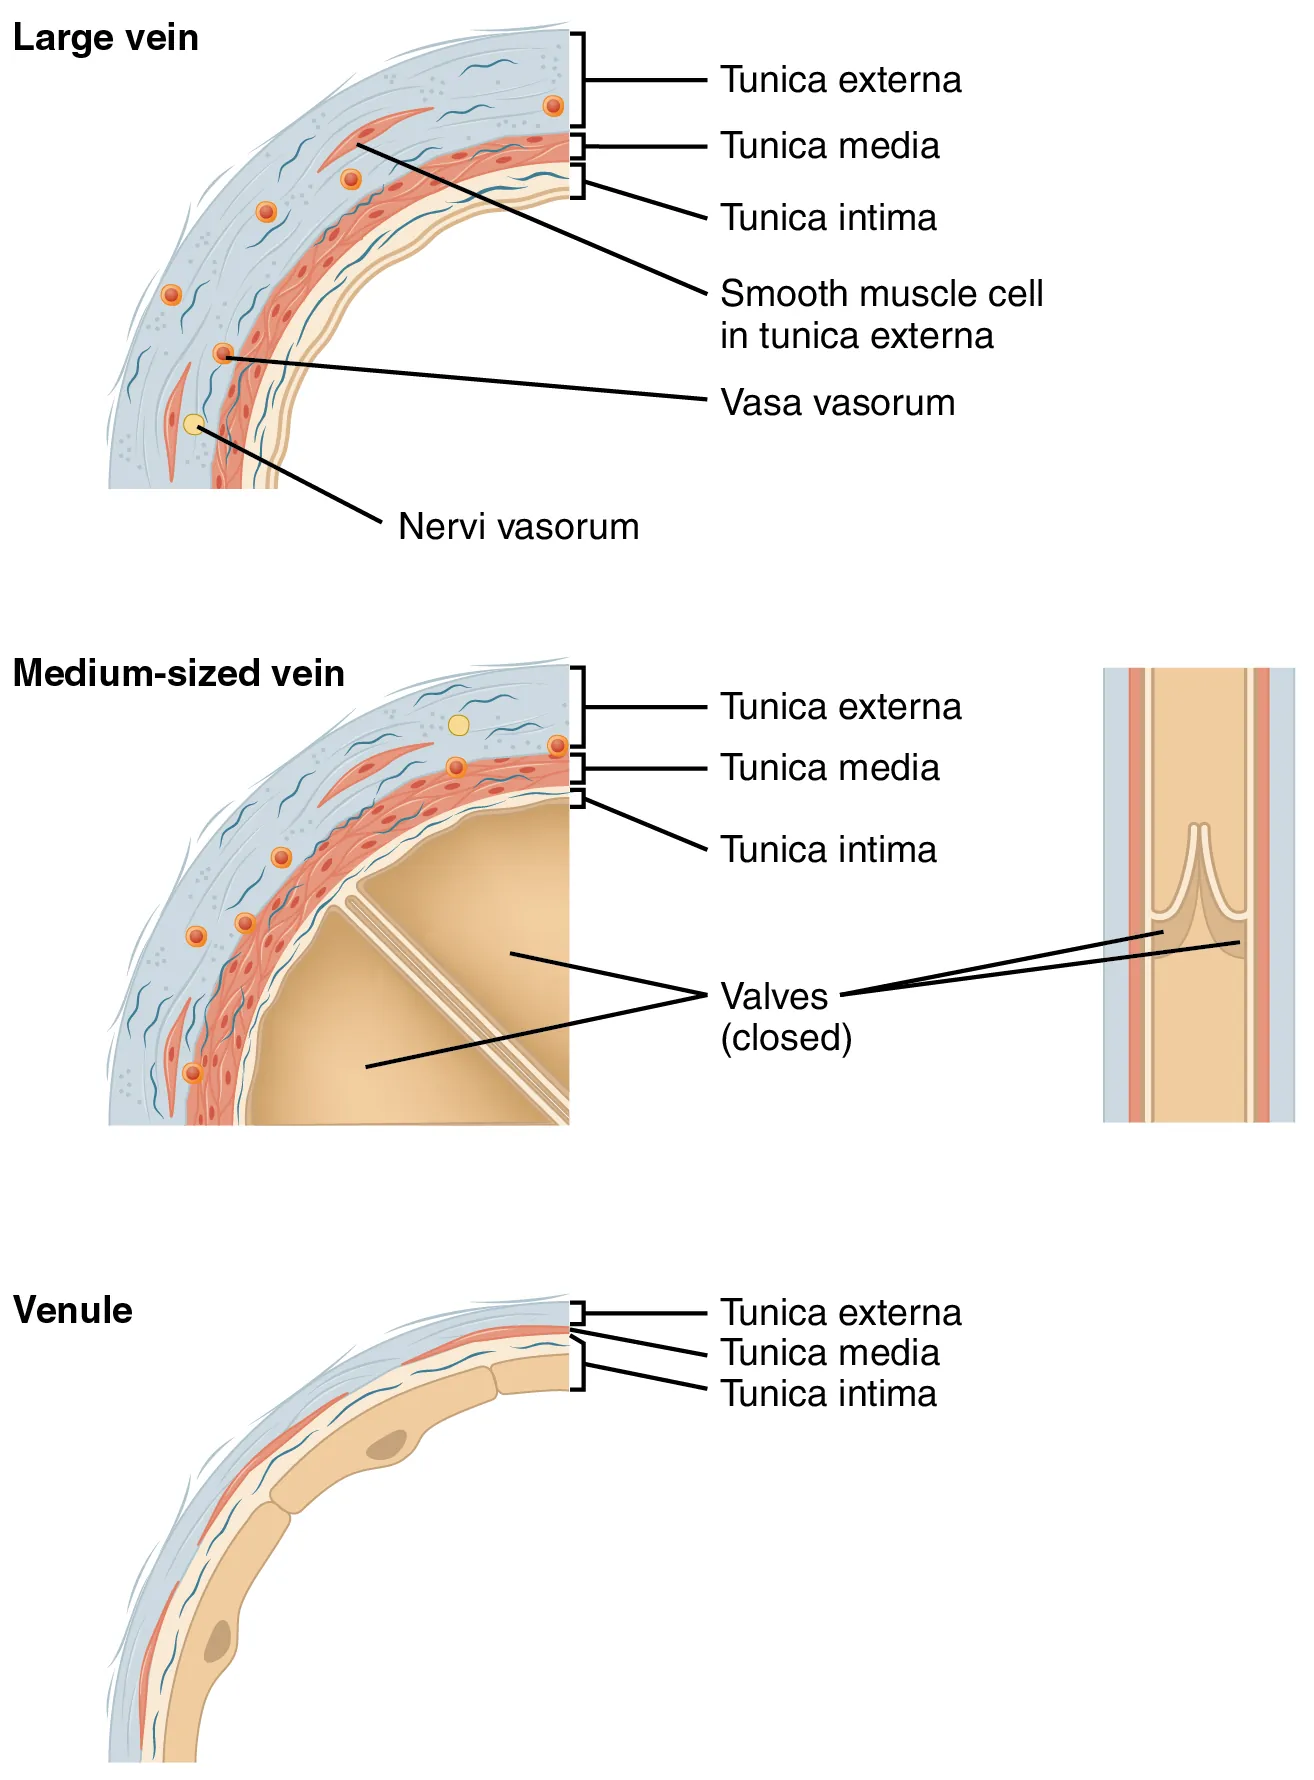 The top panel shows the cross-section of a large vein, the middle panel shows the cross-section of a medium sized vein, and the bottom panel shows the cross-section of a venule.